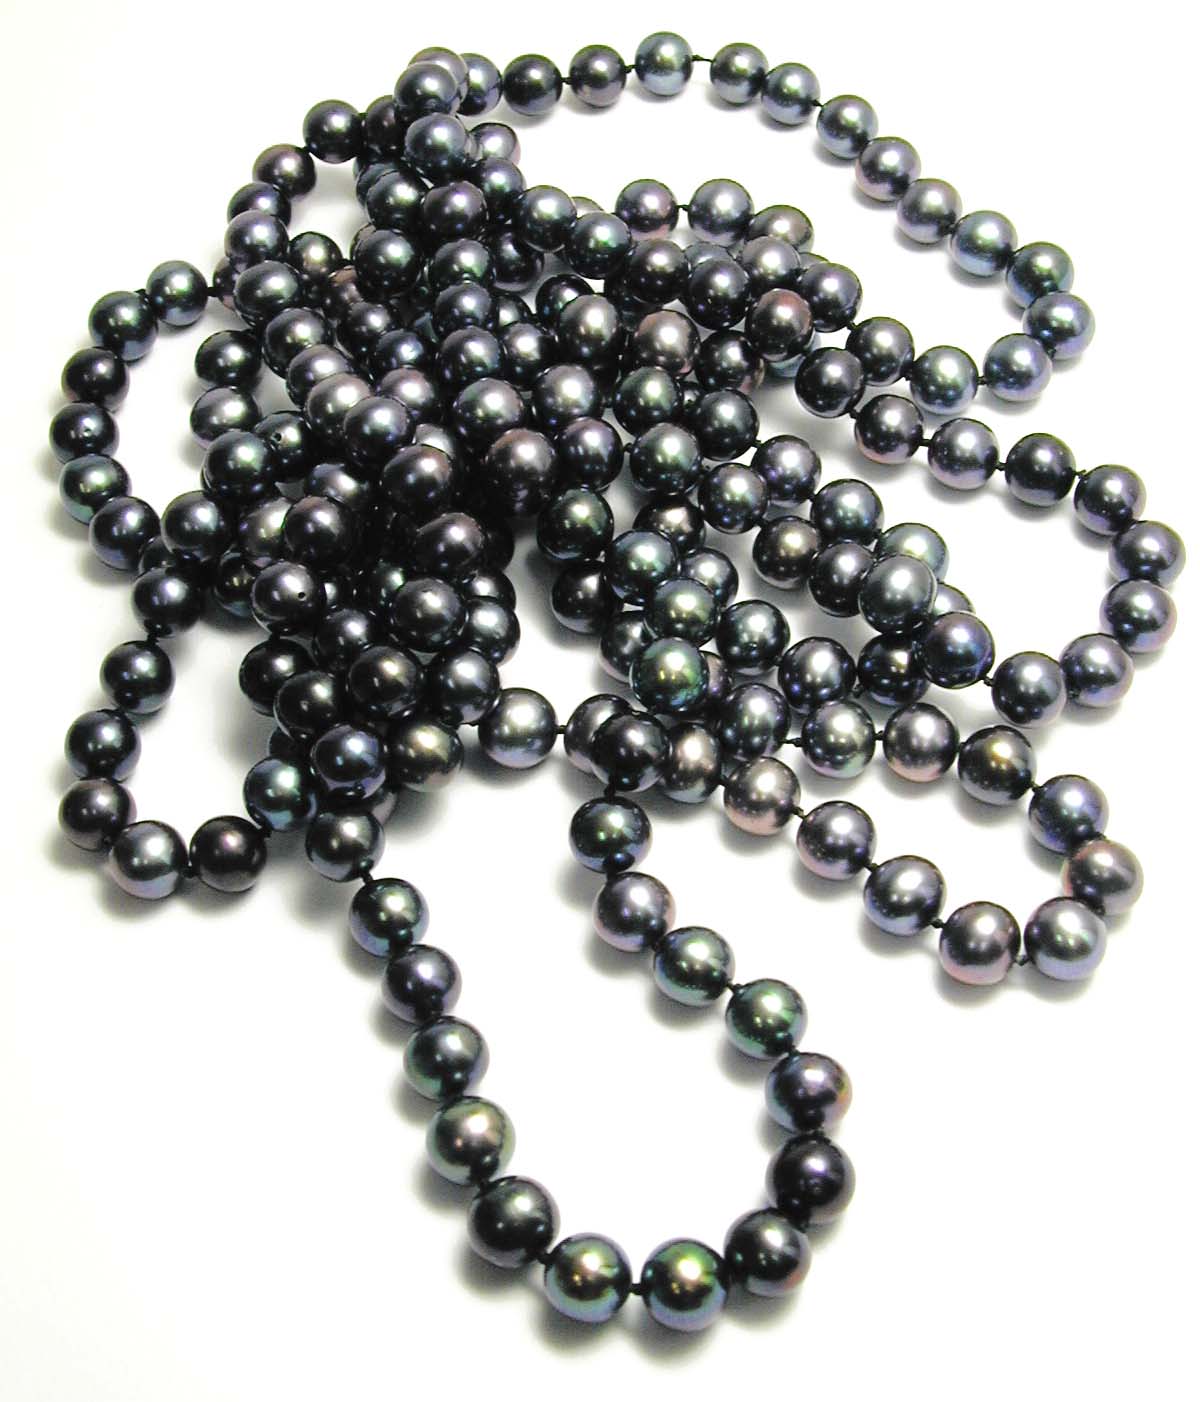 
60 Inch Black Freshwater Cultured Pearl Strand
